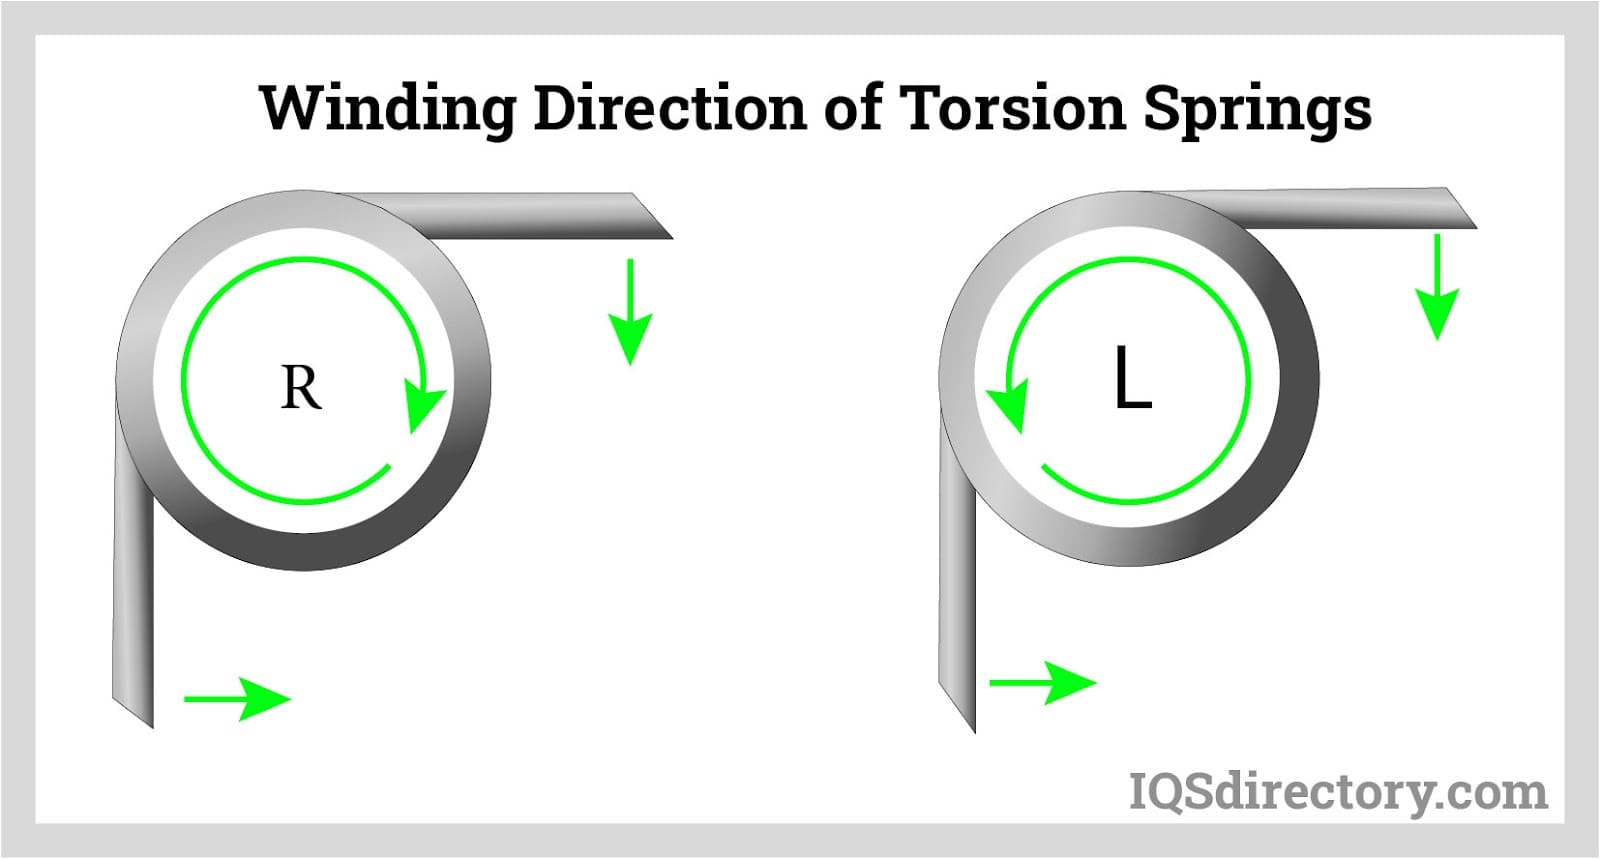 Winding Direction of Torsion Springs